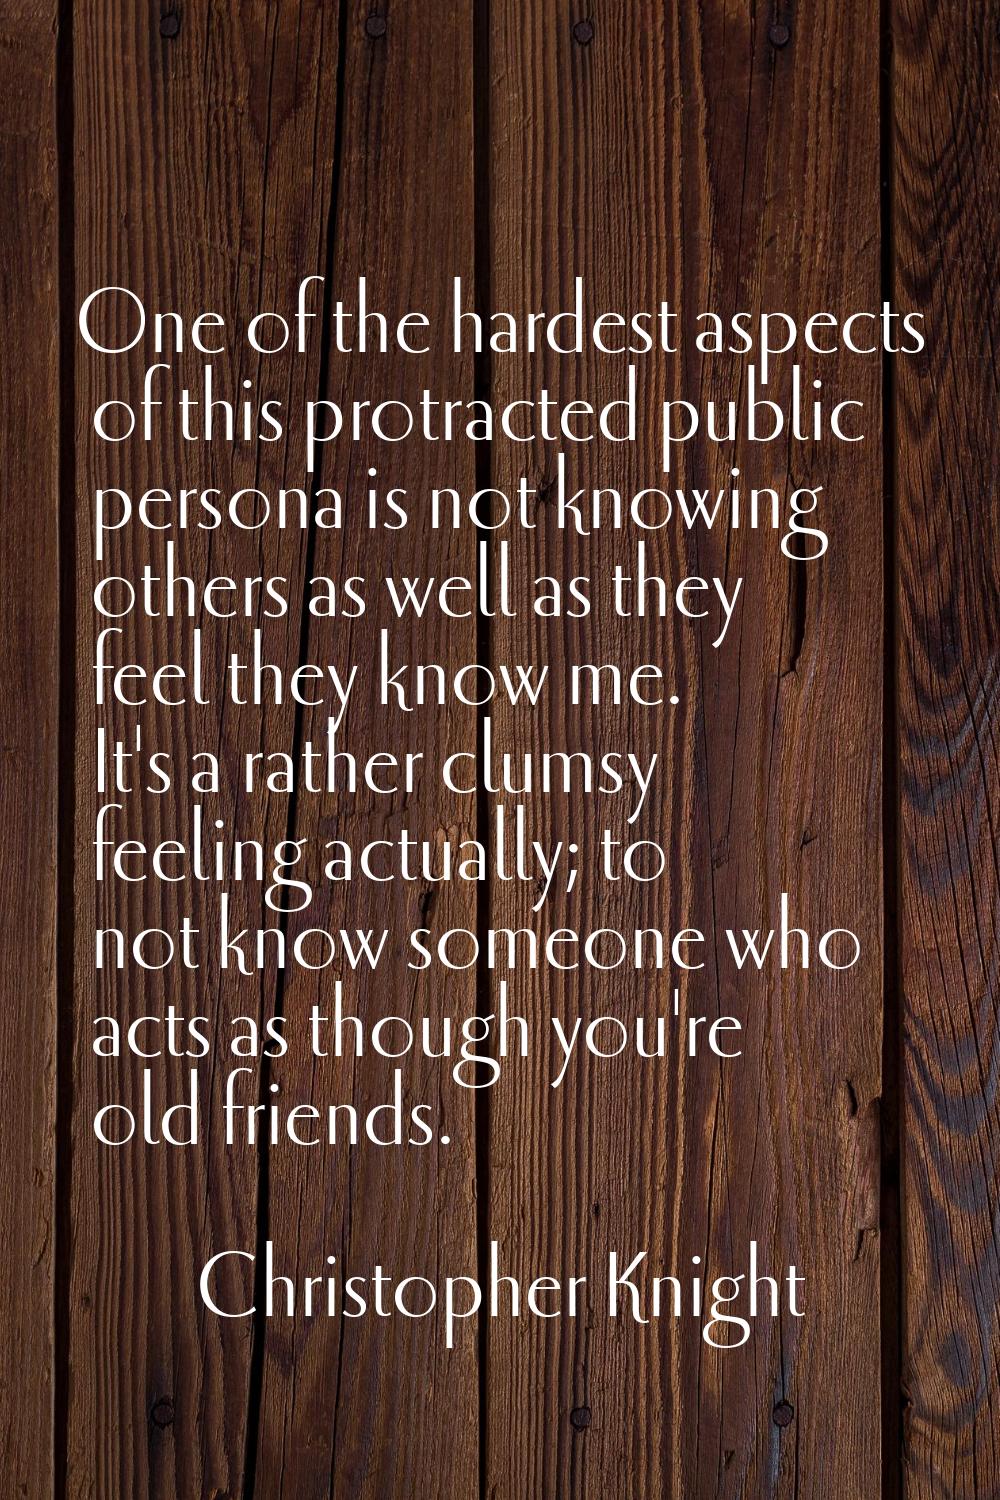 One of the hardest aspects of this protracted public persona is not knowing others as well as they 